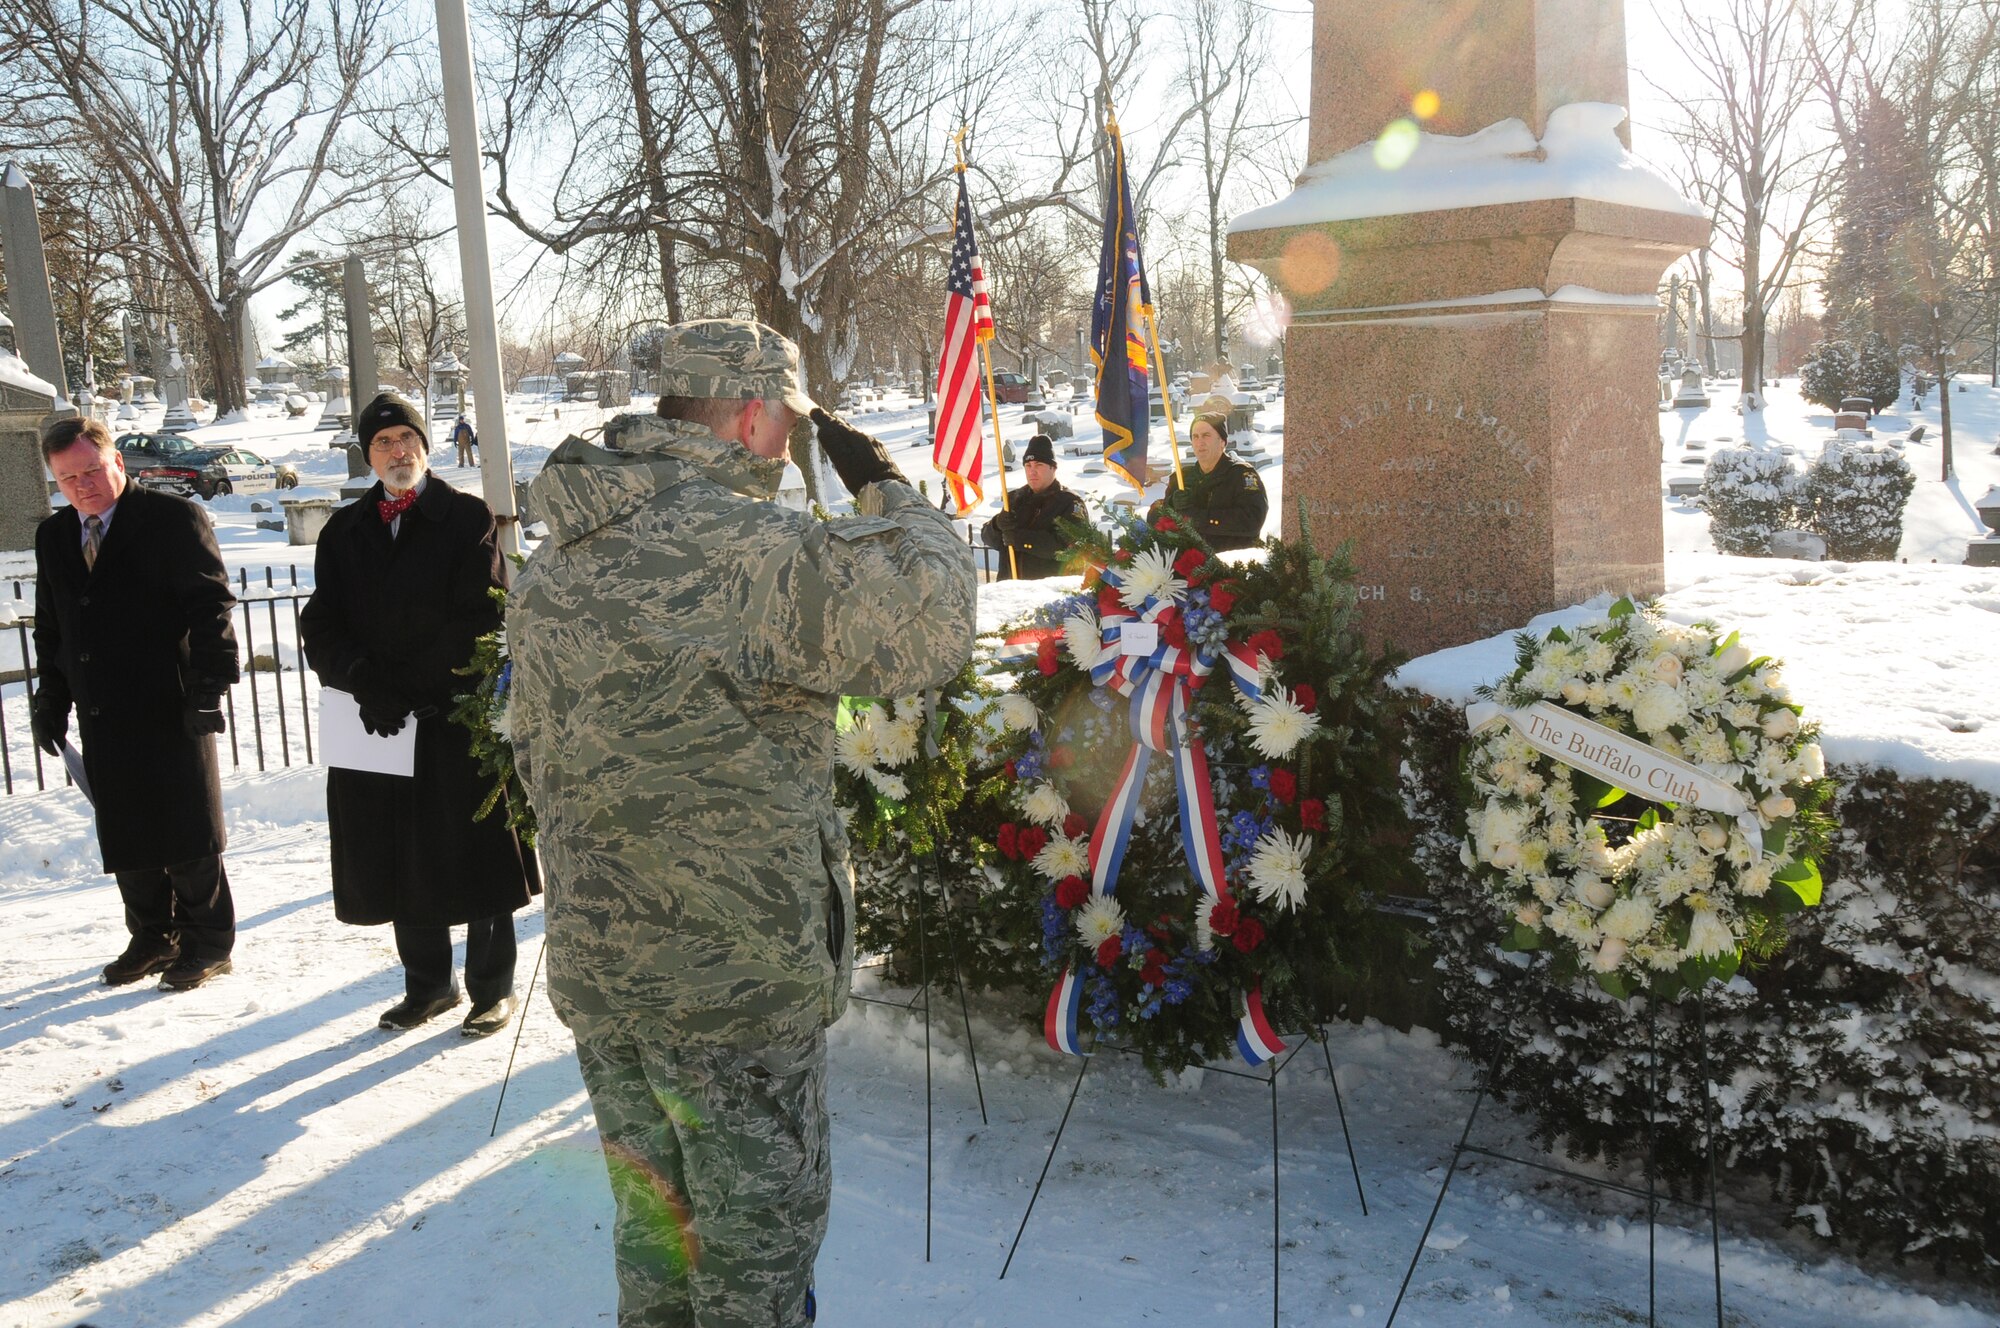 Col. John Higgins, Commander of the New York Air National Guard's 107th Airlift Wing, placed the wreath on behalf of President Barack Obama at Forest Lawn Cemetery in Buffalo, NY on January 9, 2014 (U.S.Air National Guard Photo/Senior Master Sgt. Ray Lloyd)